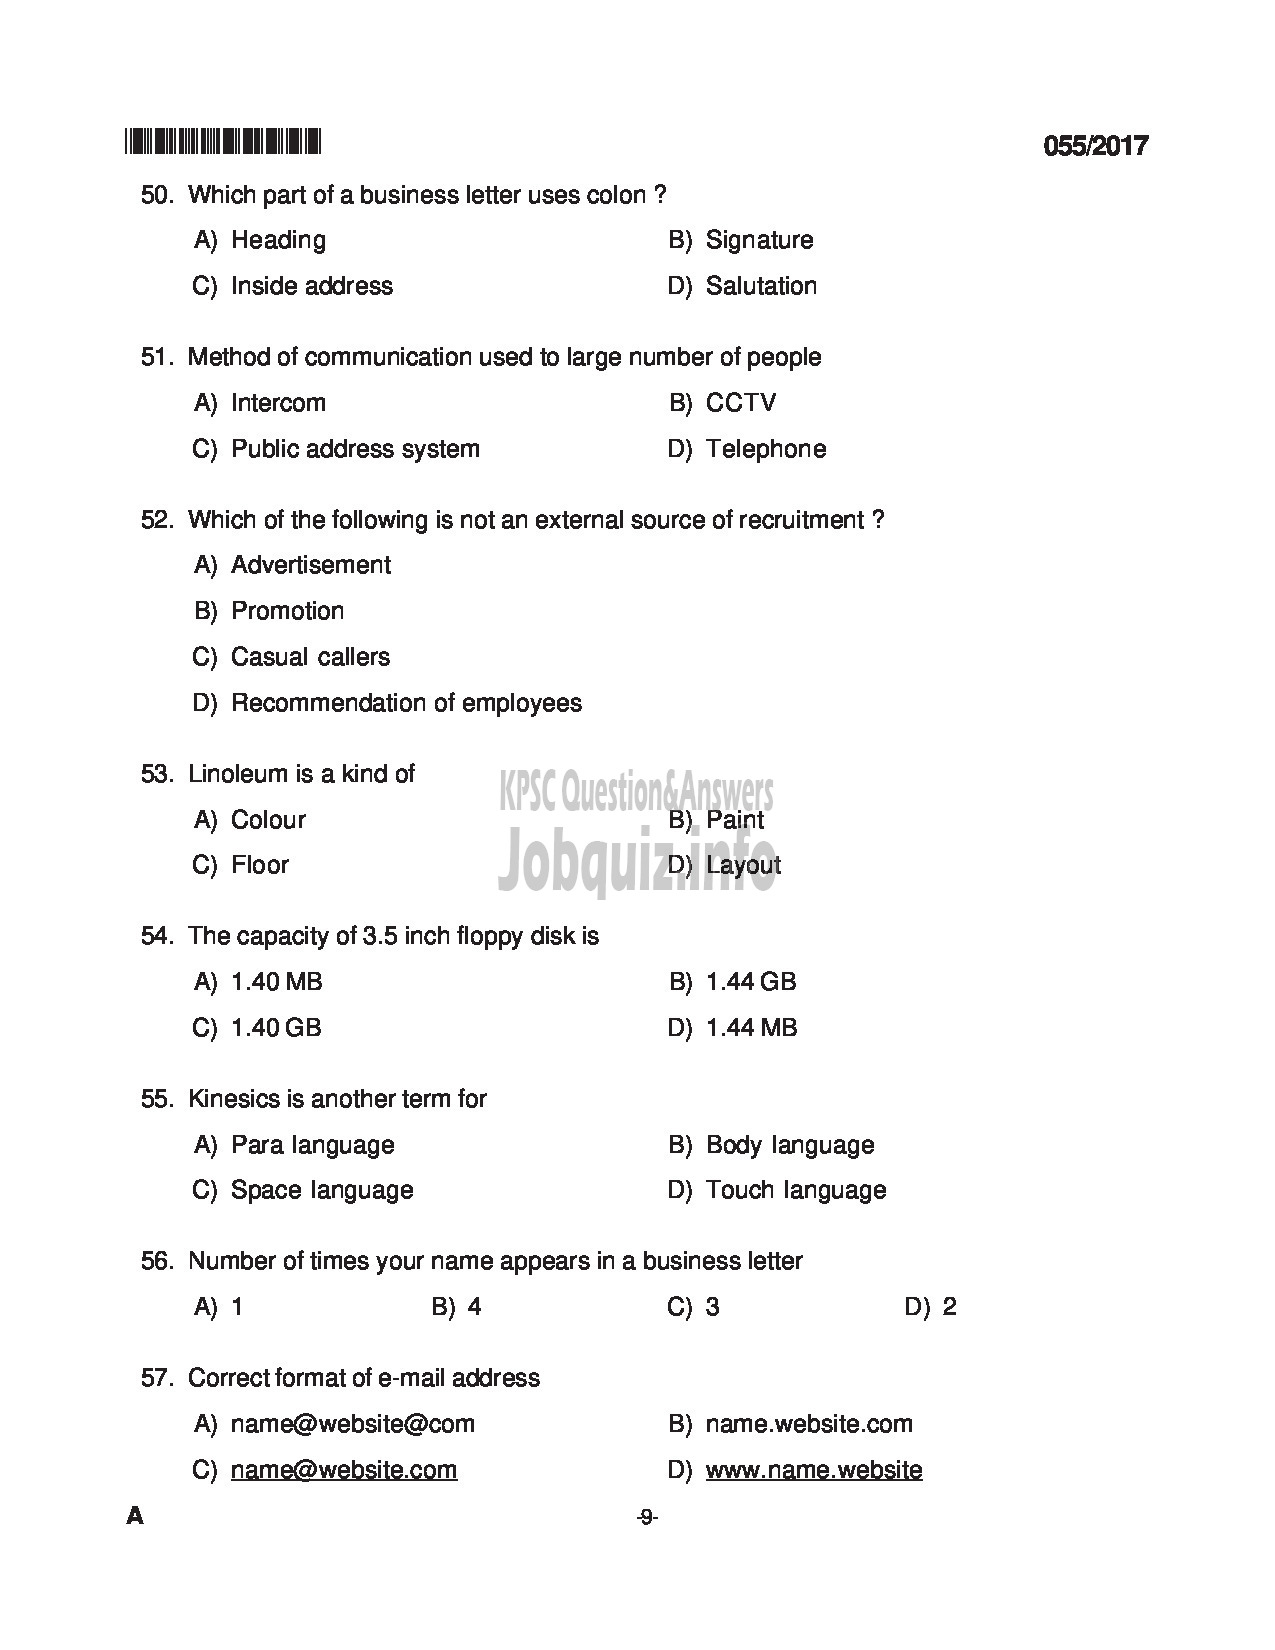 Kerala PSC Question Paper - INSTRUCTOR IN SECRETARIAL PRACTICE AND BM TECHNICAL EDUCATION QUESTION PAPER-9